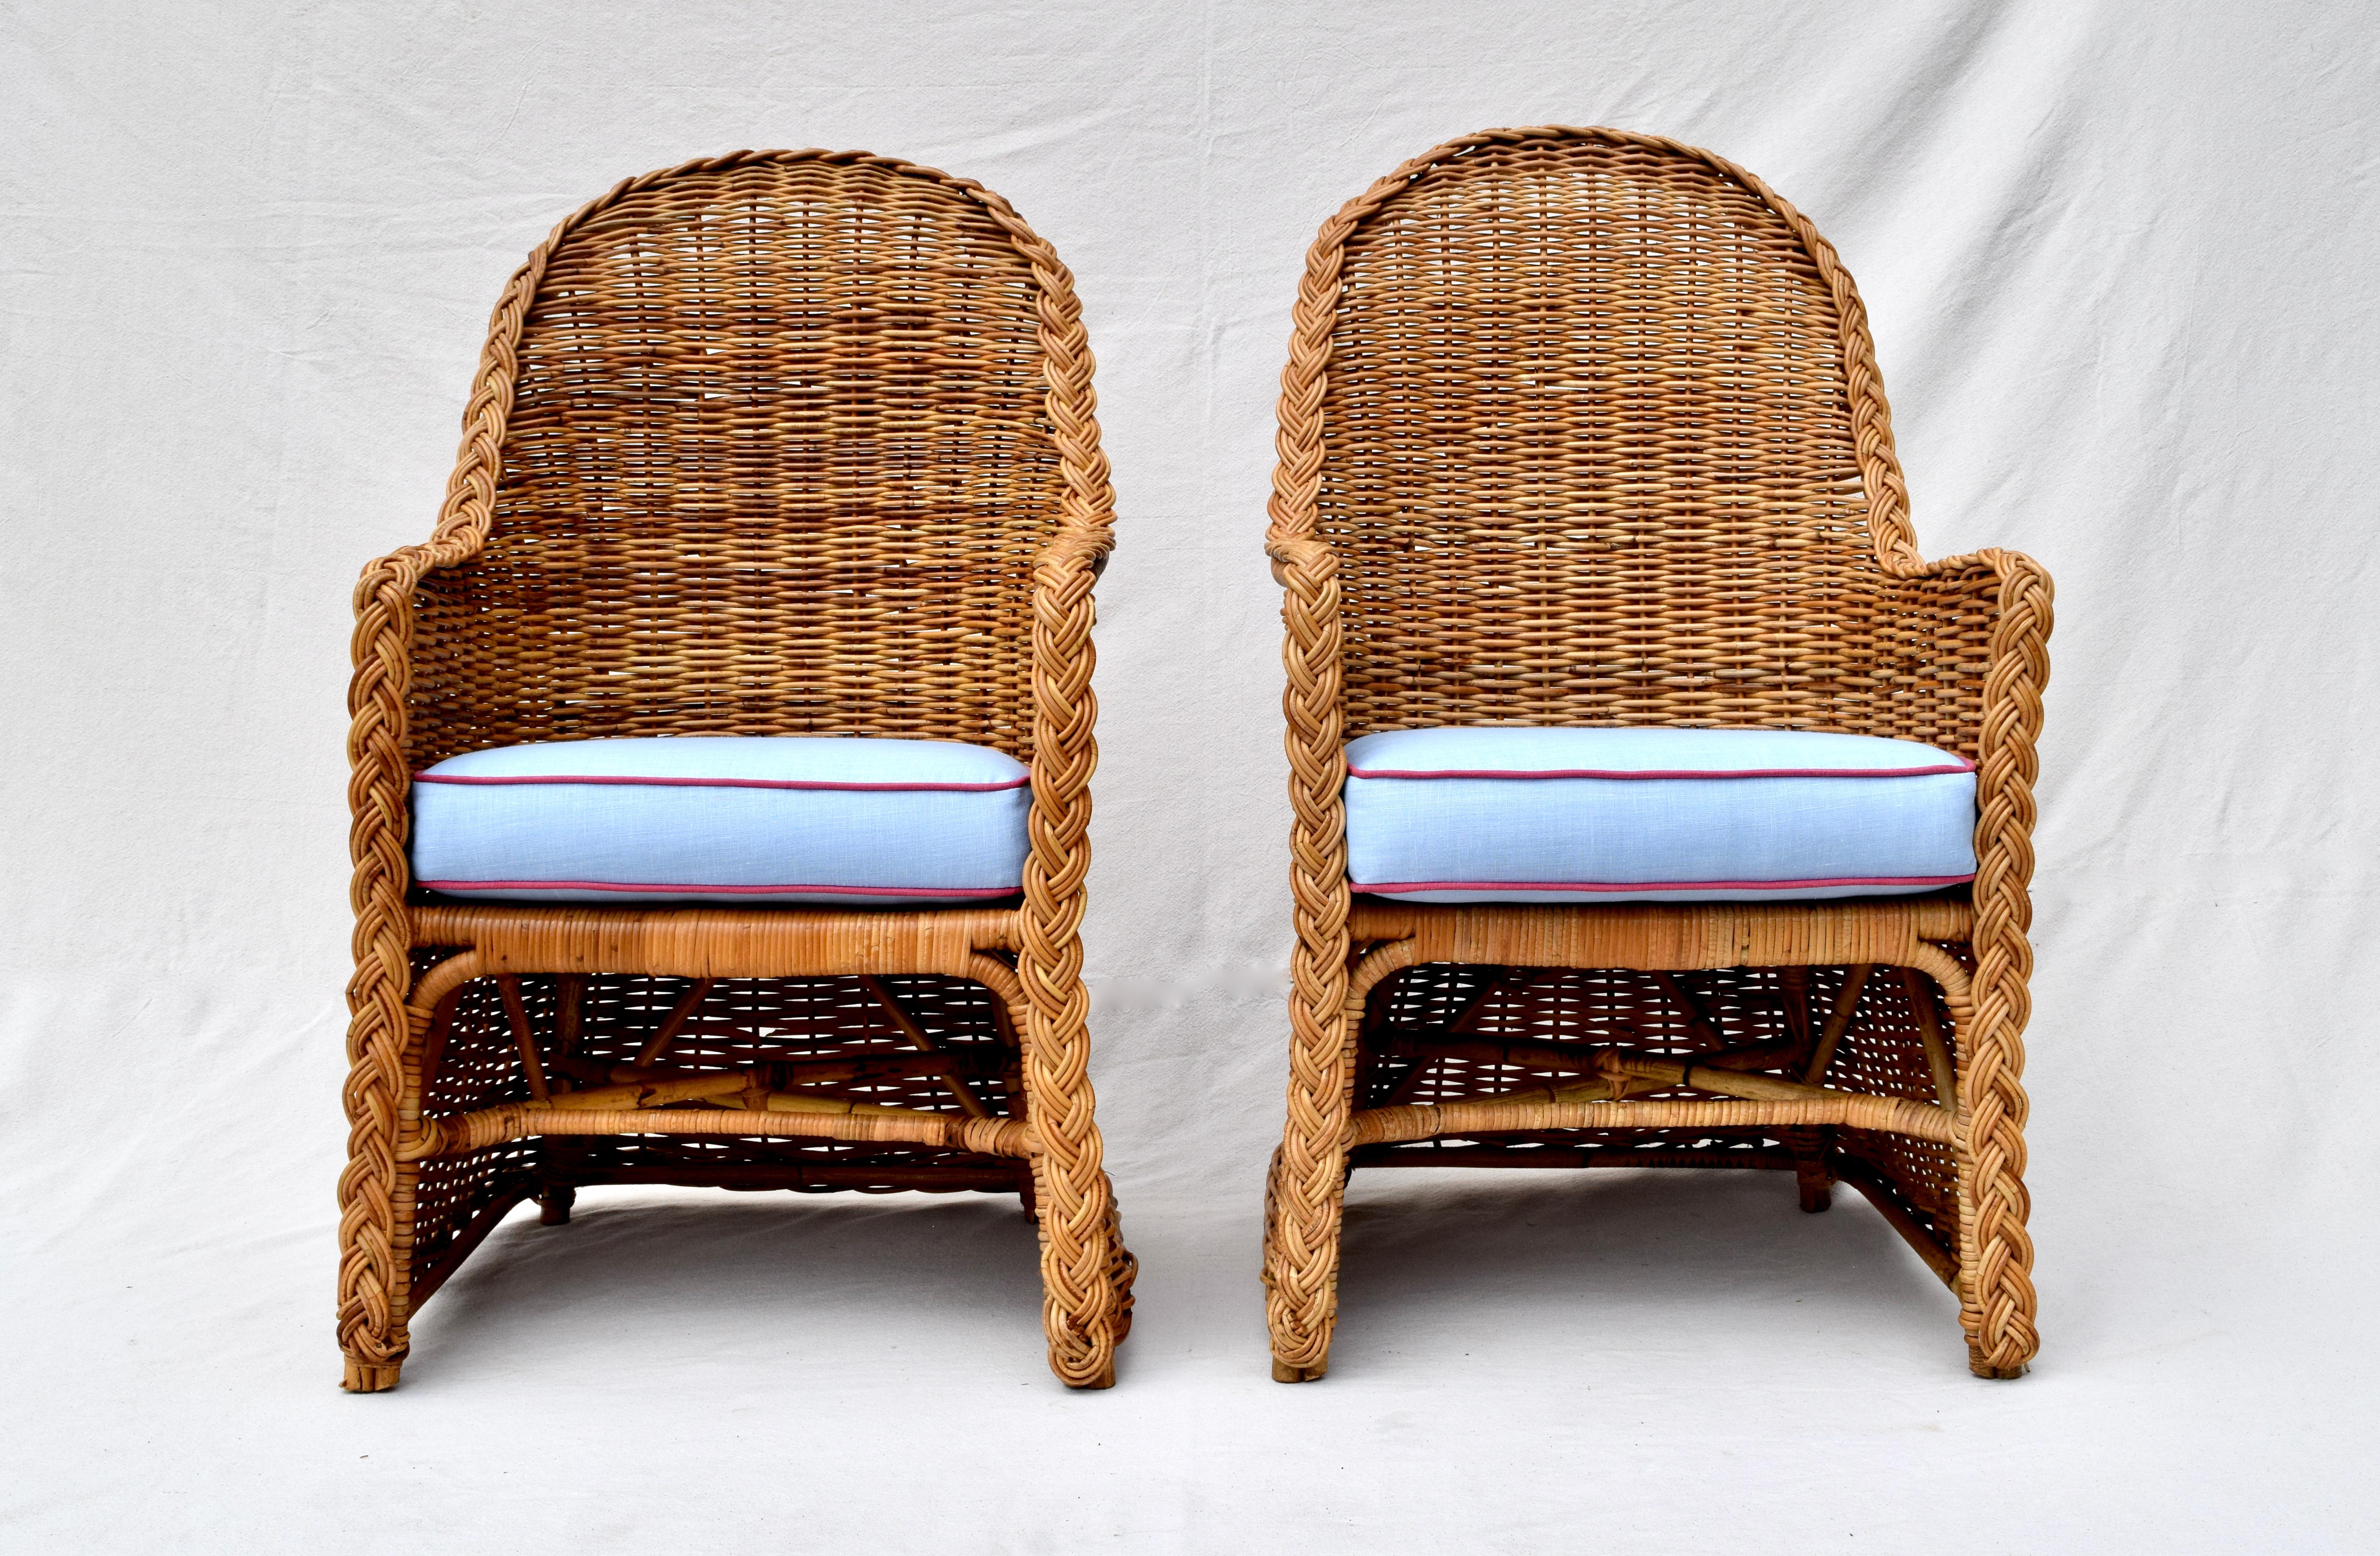 A pair of Michael Taylor braided wicker rattan armchairs with new loose cushions upholstered in new stock vintage Ralph Lauren sky blue and cranberry linen. Additionally each chair includes one goose down cushion upholstered in Brunschwig & Fils